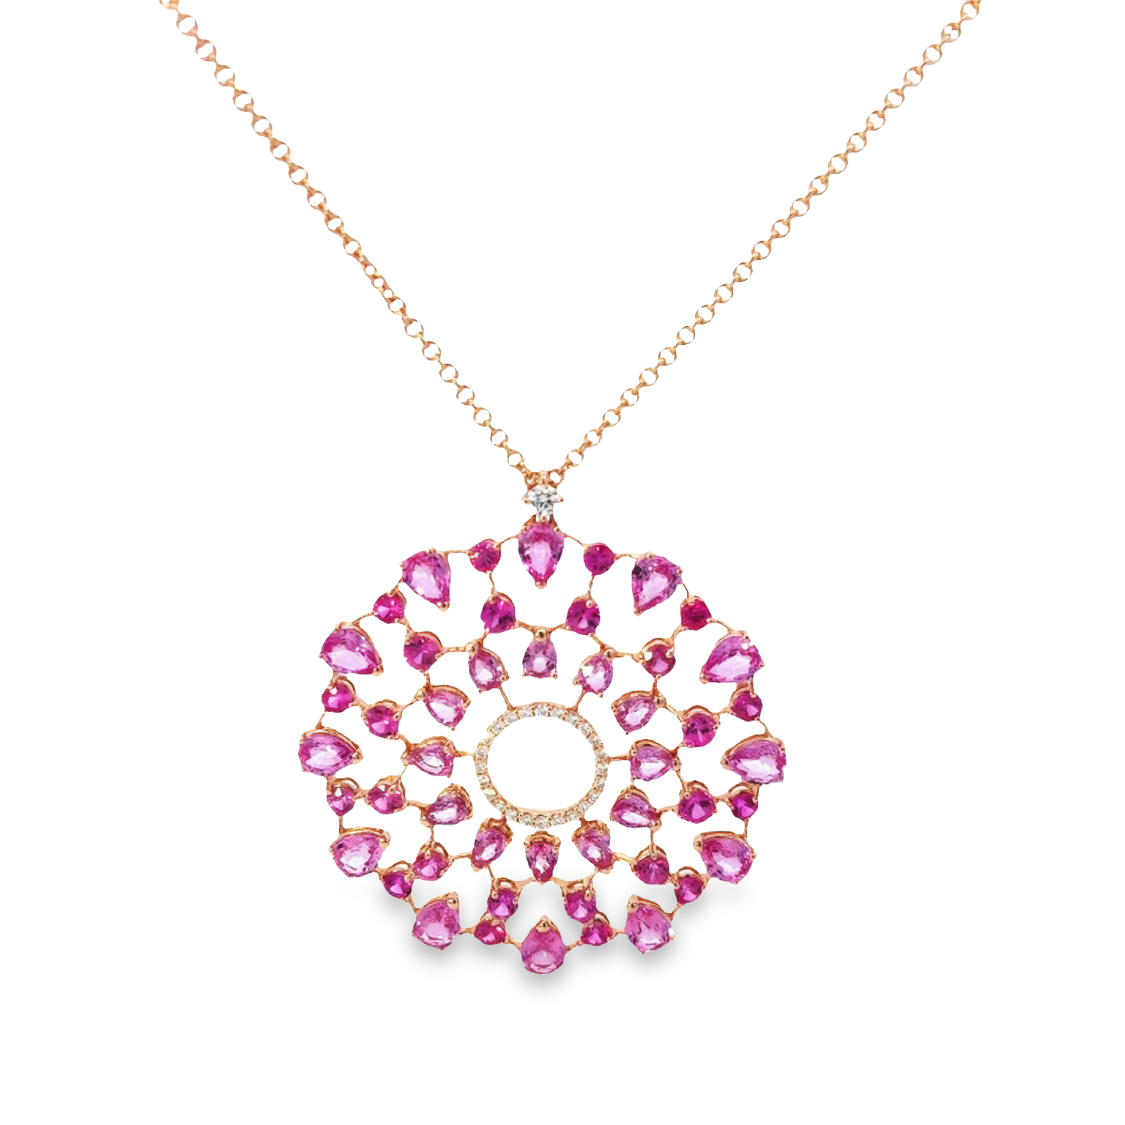 Leo Pizzo 18K Rose Gold Pink Sapphire and Diamond Starburst Necklace